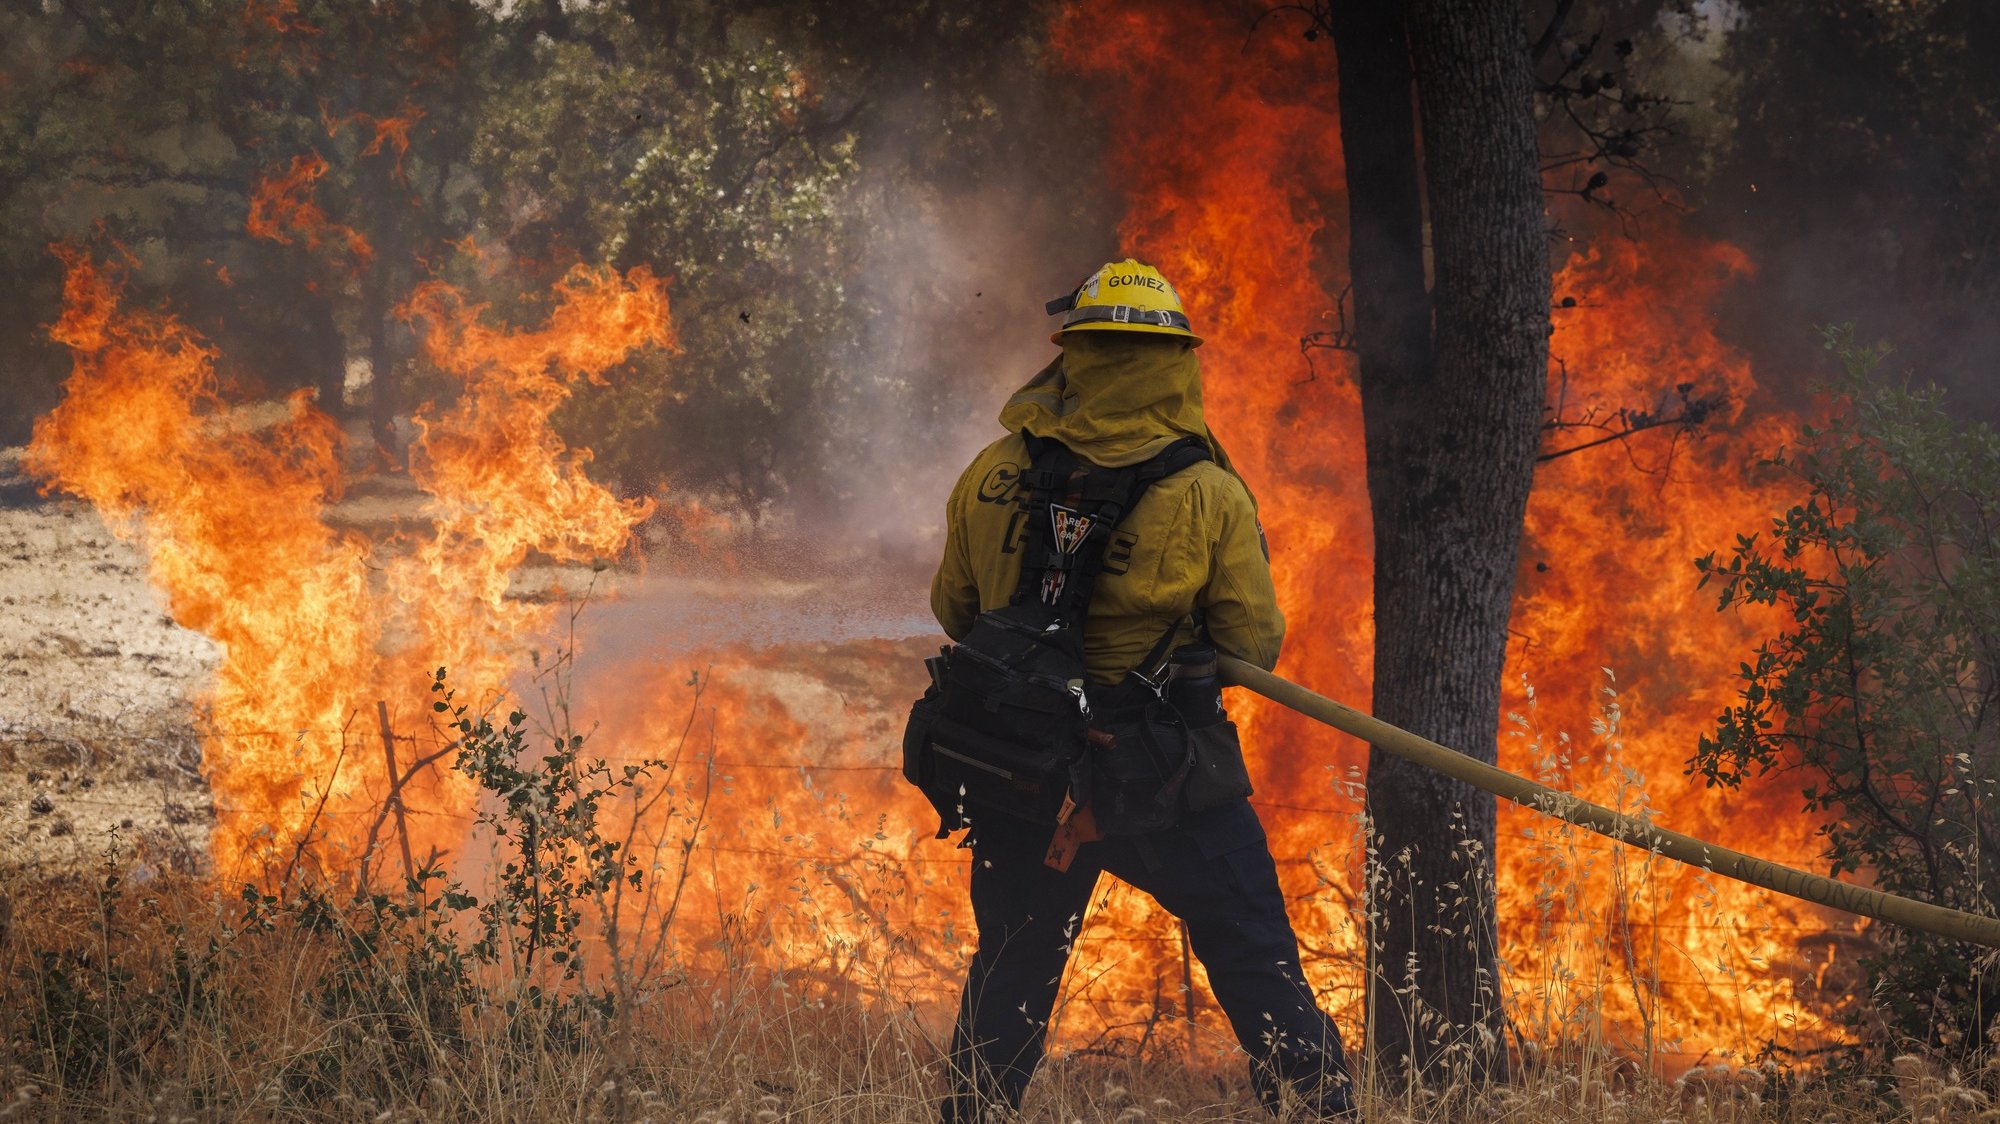 epa10088907 A firefighter battles the Oak Fire in Midpines, California, USA, 23 July 2022. The fire began on the edge of Yosemite National Park in the afternoon of 22 July, and rapidly expanded overnight to more than 6,000 acres (2,400 hectares), according to CalFire. Thousands of evacuations have been ordered as the fire continues to grow with zero percent containment.  EPA/PETER DA SILVA